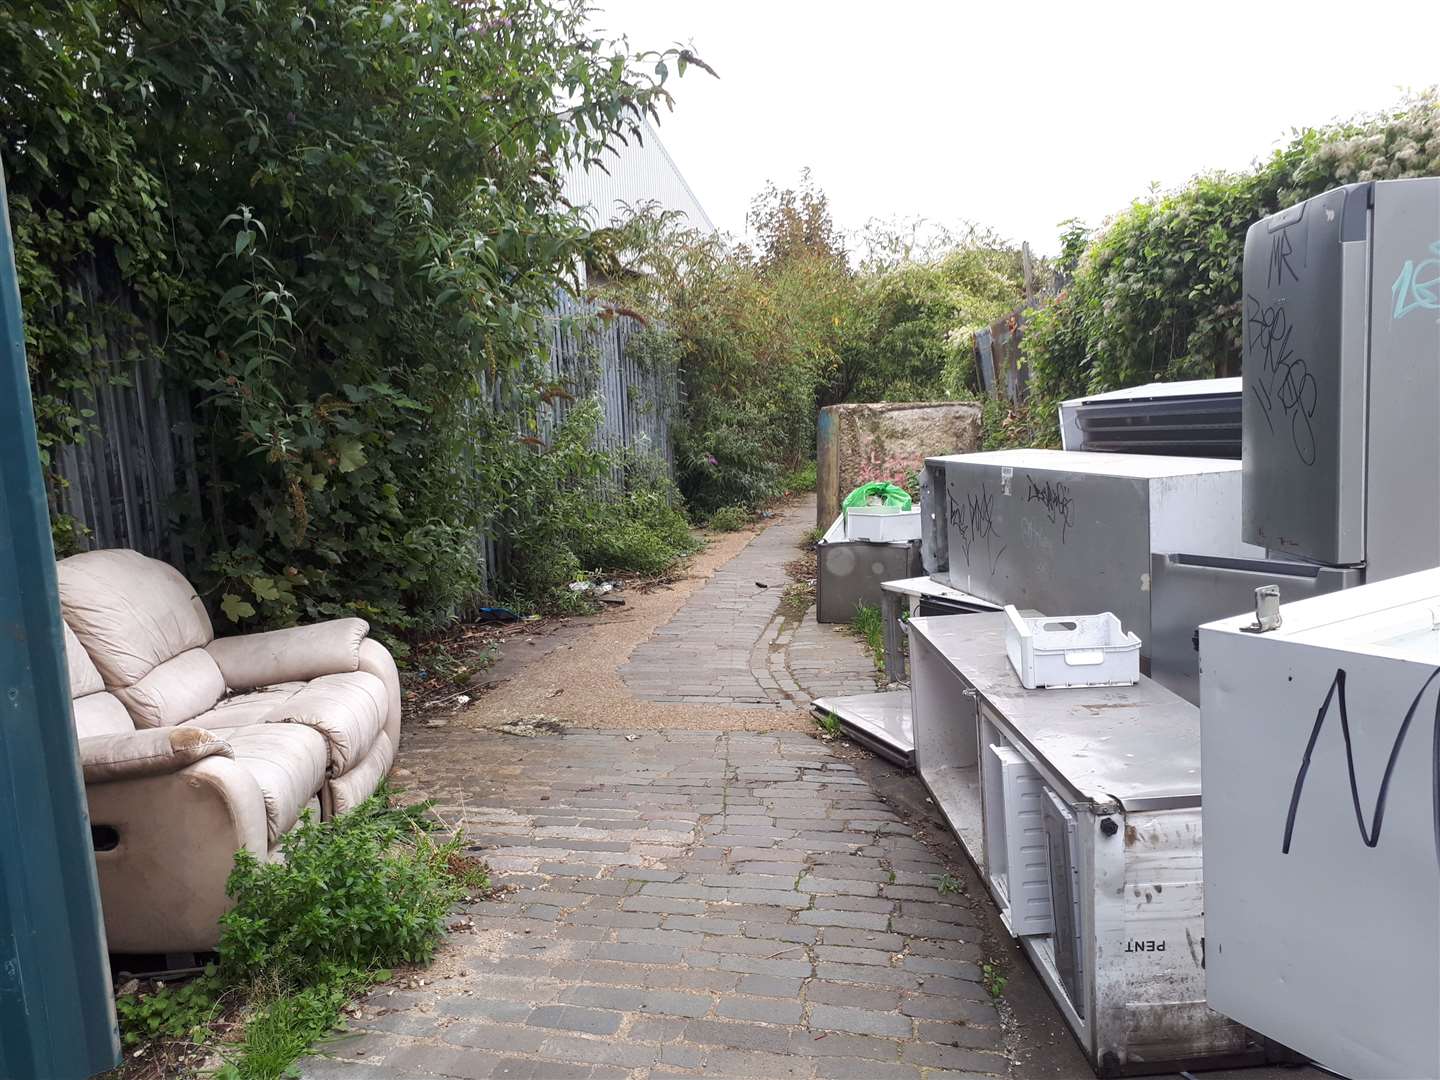 Fly-tipping found on the industrial estate close to the Ship and Lobster Inn in Gravesend Photo: Wayne Dixon